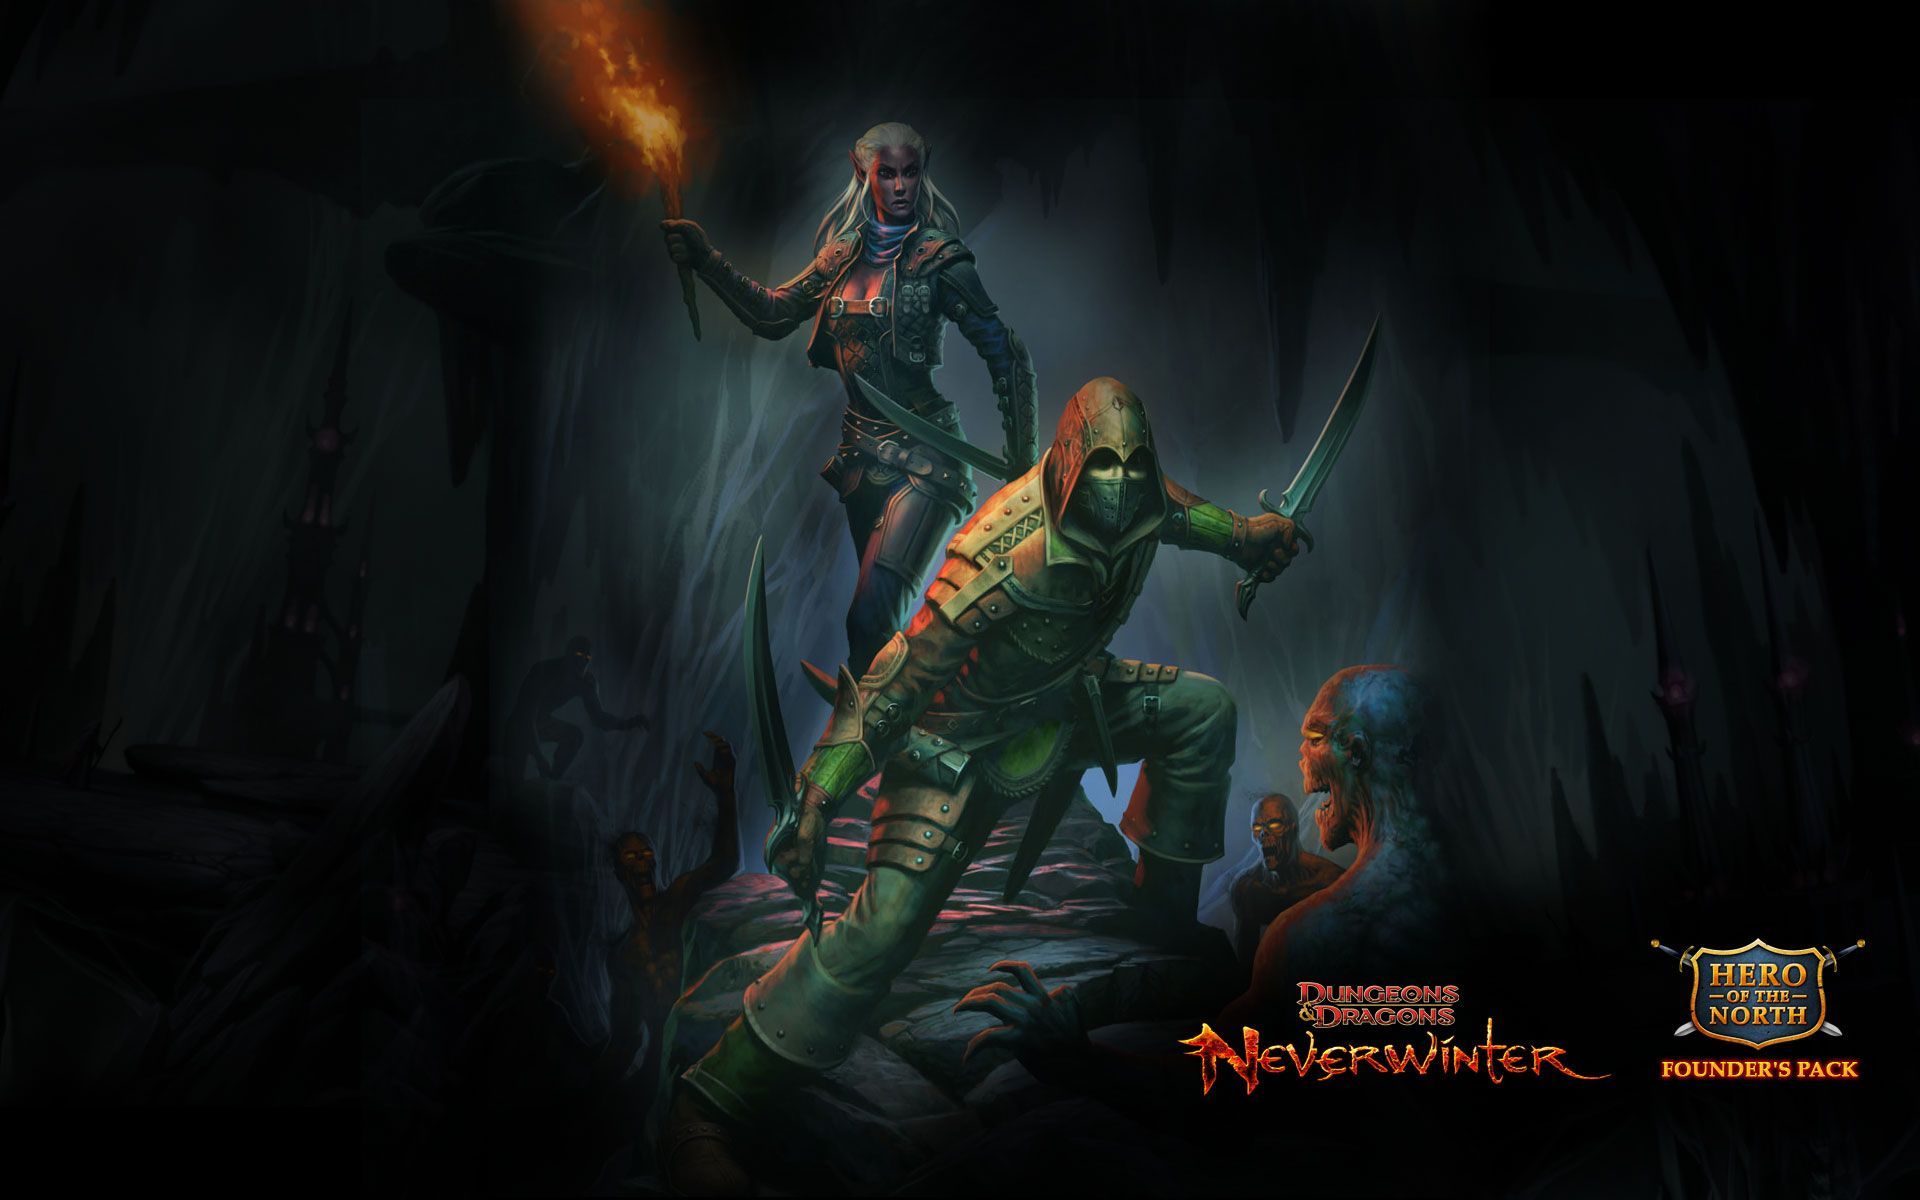 Dungeons And Dragons Wallpaper 1920x1080 Deadly trickster rogue 1920x1200. Dungeons and dragons, Dungeon, Dragon